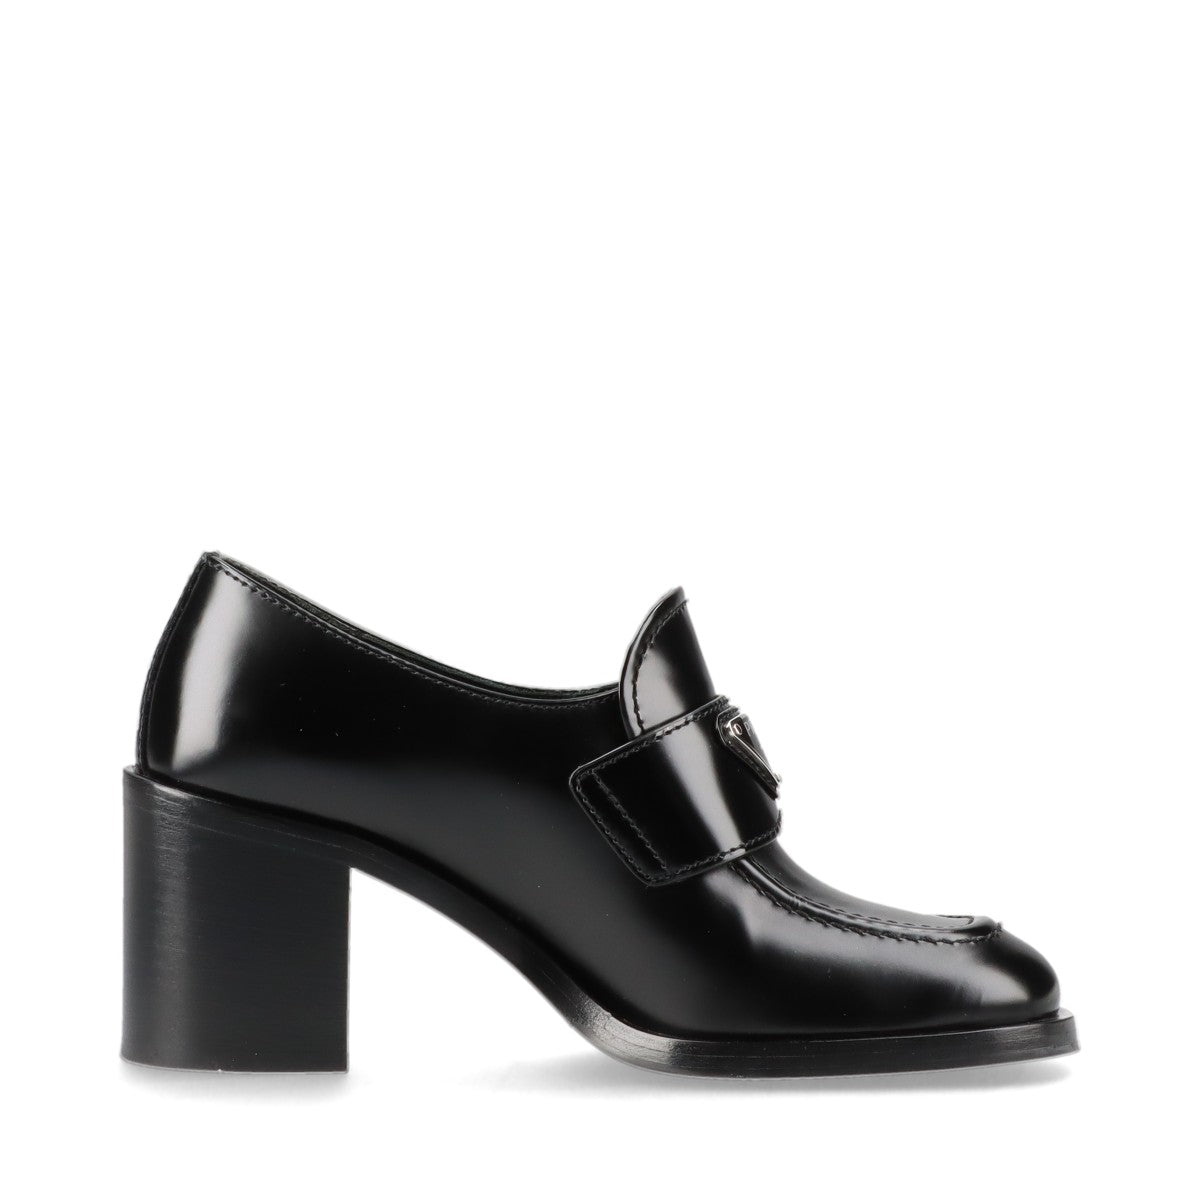 Prada Triangle logo brushed leather Loafer 36 Ladies' Black High Heel Box There is a storage bag